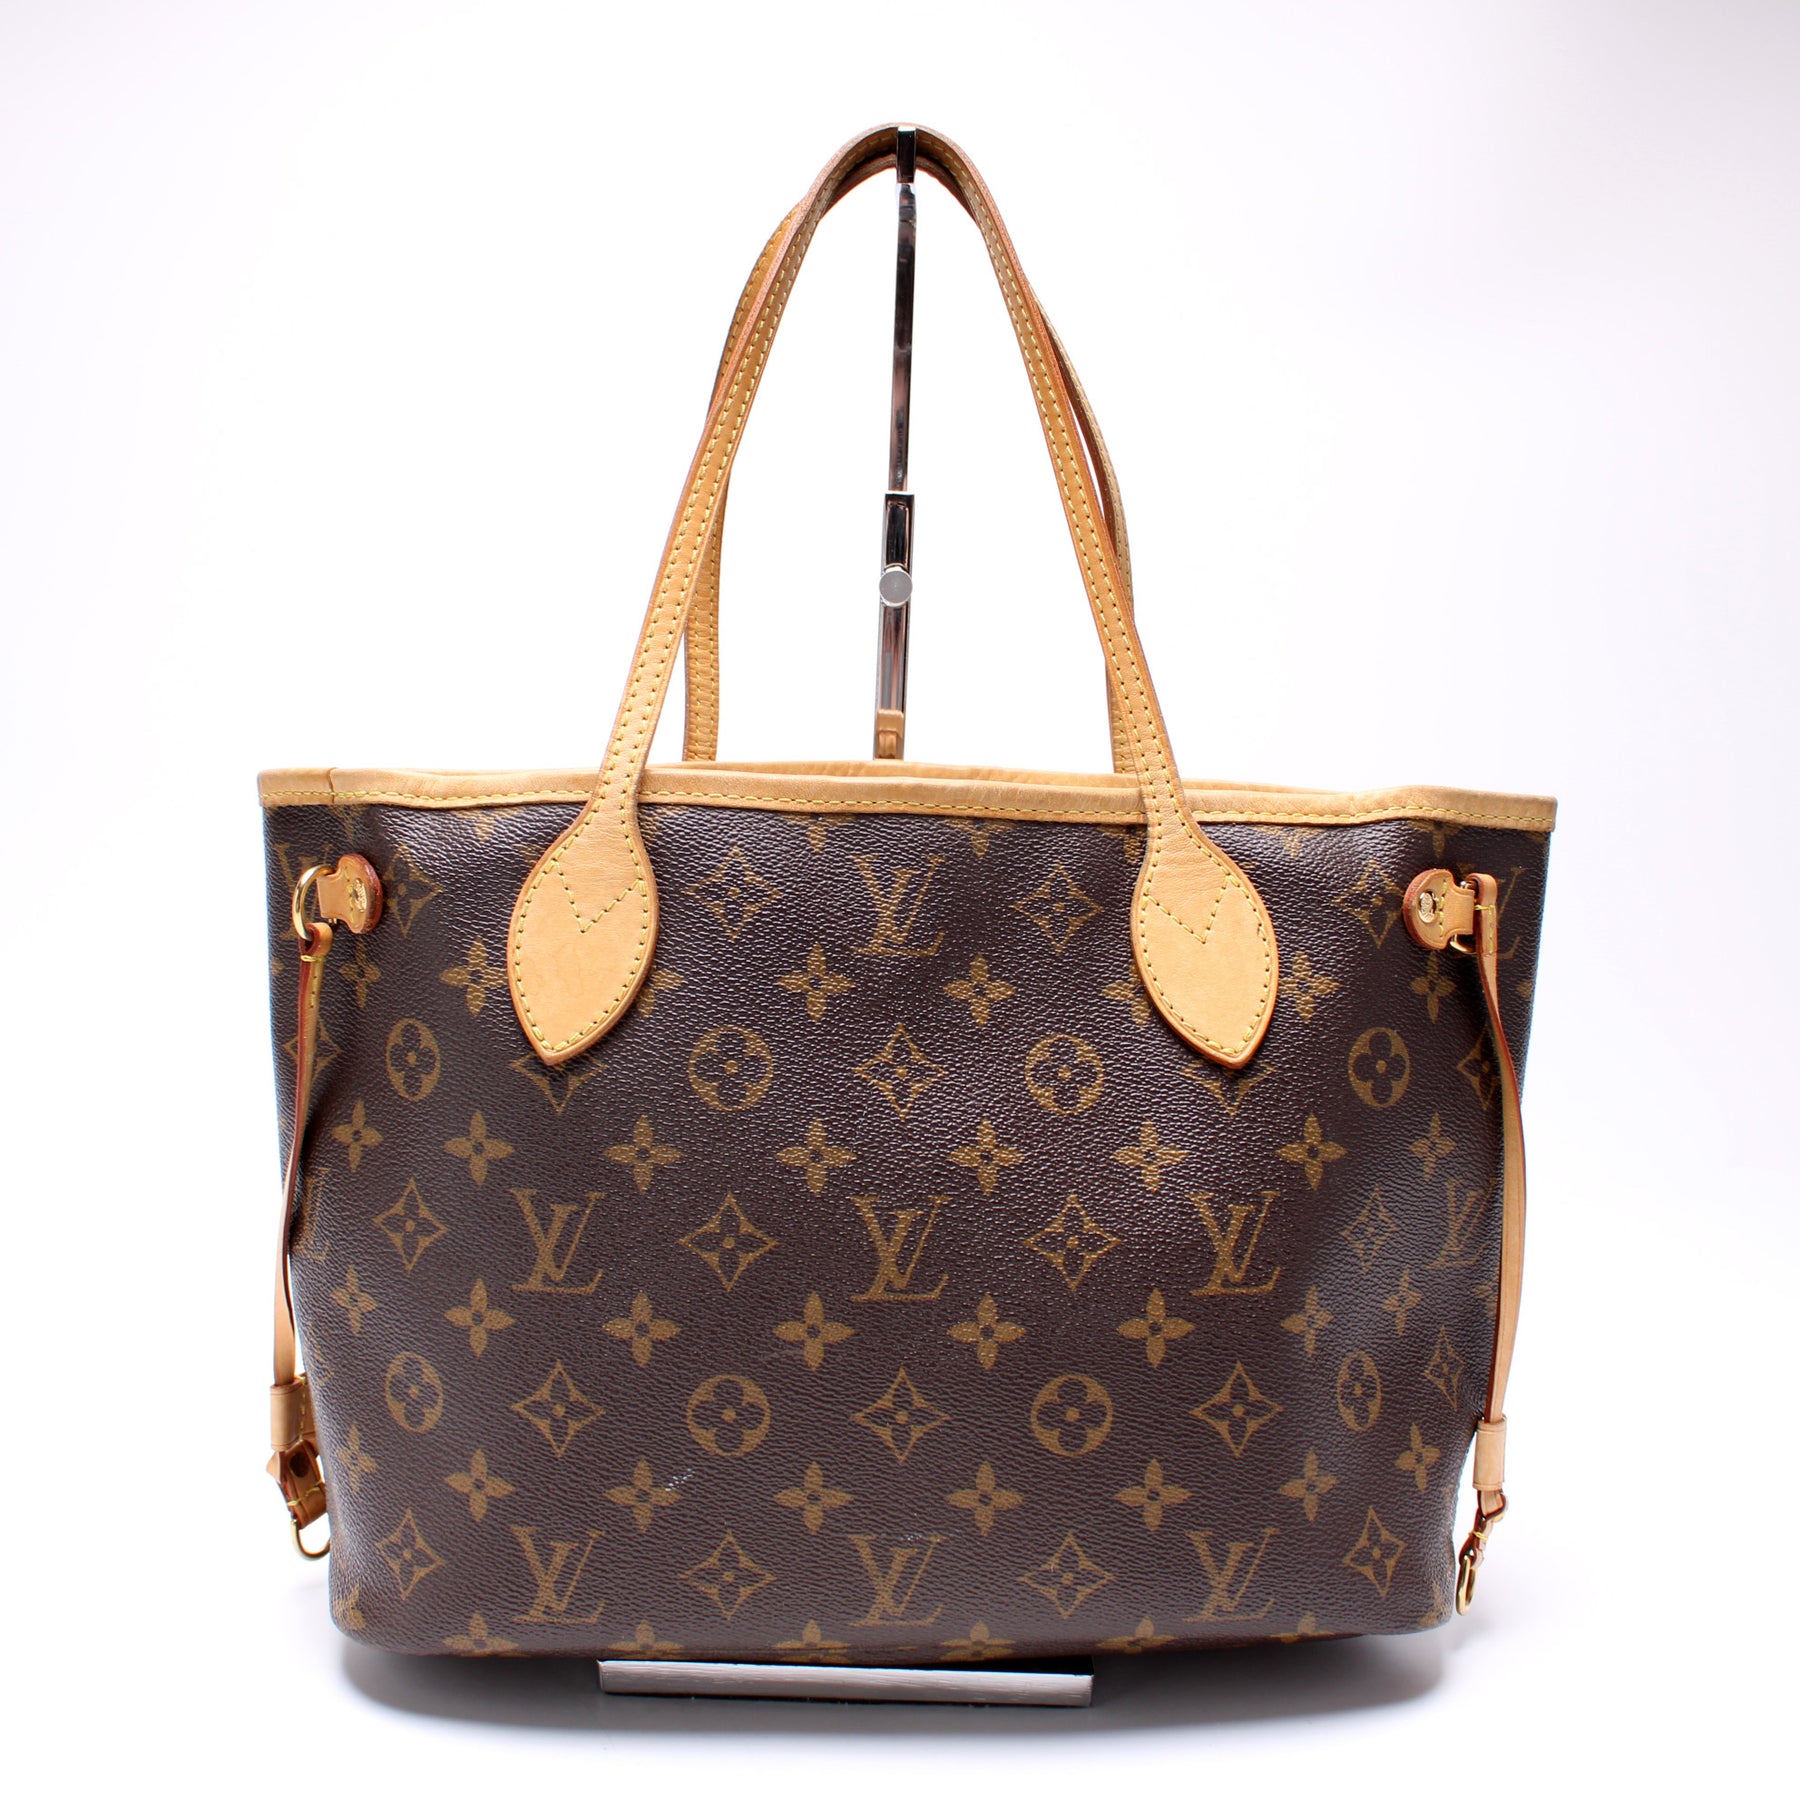 Products by Louis Vuitton: Neverfull PM